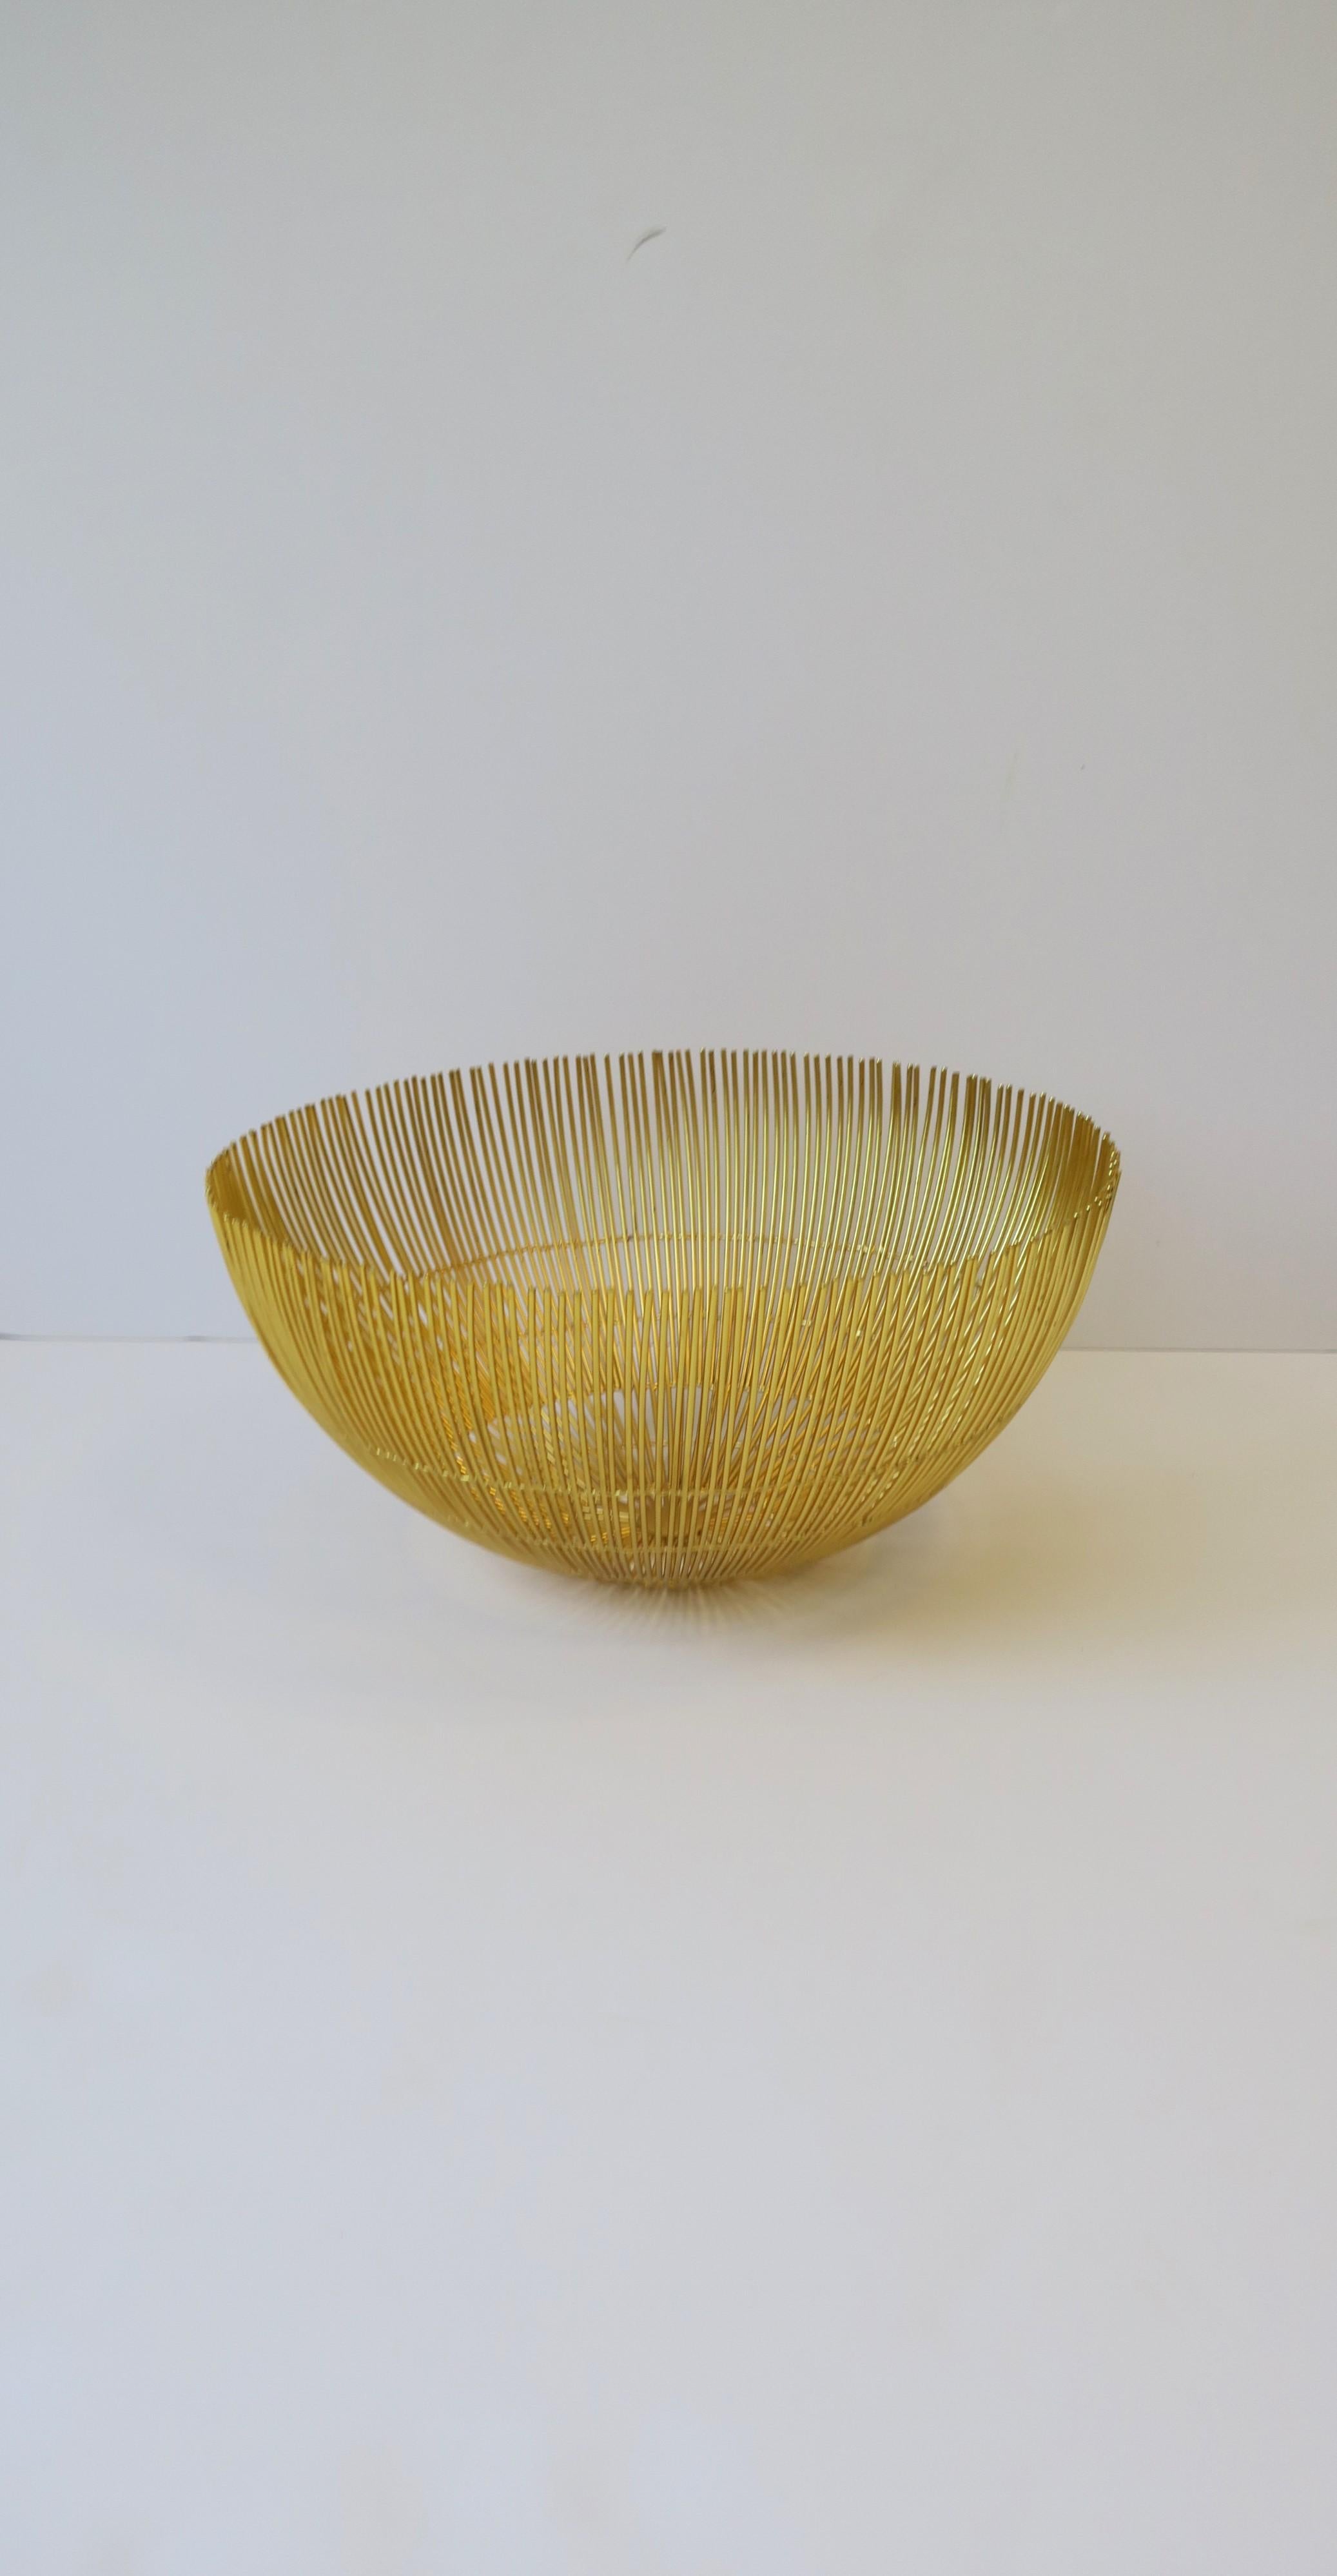 A great large metal bowl basket with a twig-like design in a bright gold hue, circa 21st century. Bowl makes a beautiful standalone piece, centerpiece bowl, etc., and great to hold fruits and vegetables. Bowl/basket is a nice size. Dimensions: